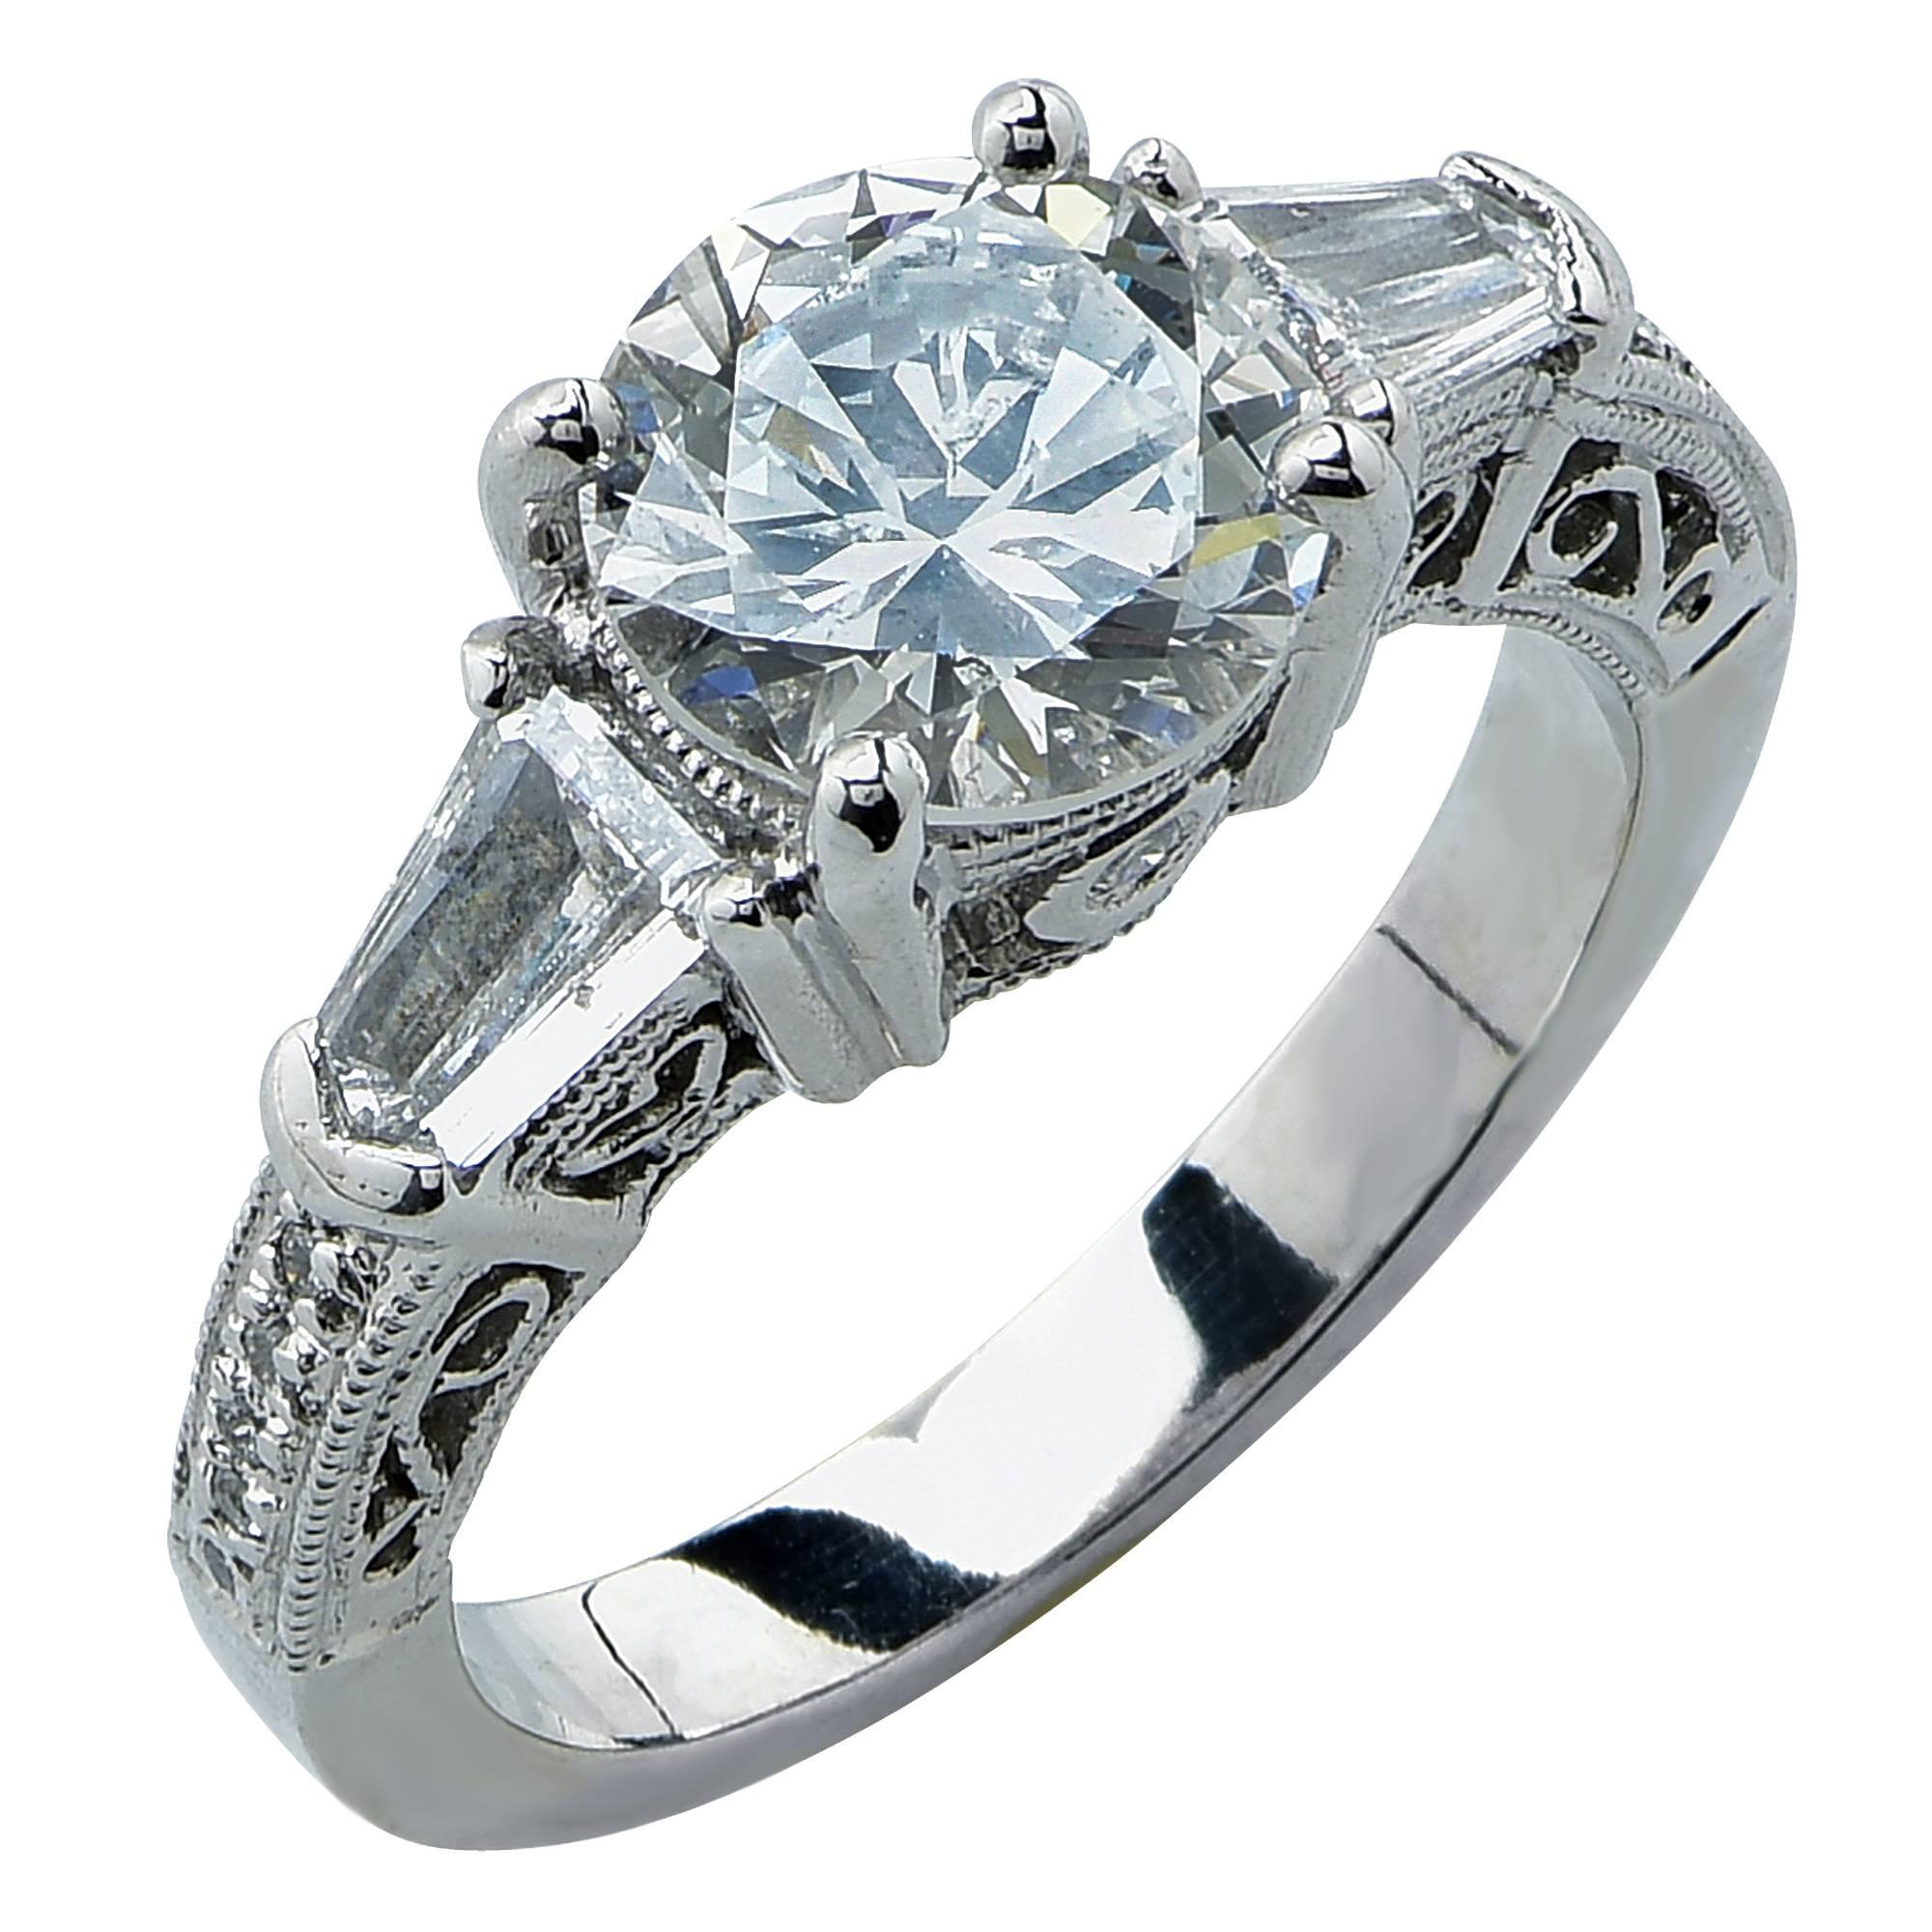 Platinum ring featuring a GIA graded 1.82ct round brilliant cut diamond H color SI1 clarity accented by 2 bullet cut diamonds weighing .50cts total G color VS-SI clarity, accented by 14 round brilliant cut diamonds weighing .15cts total, G color VS